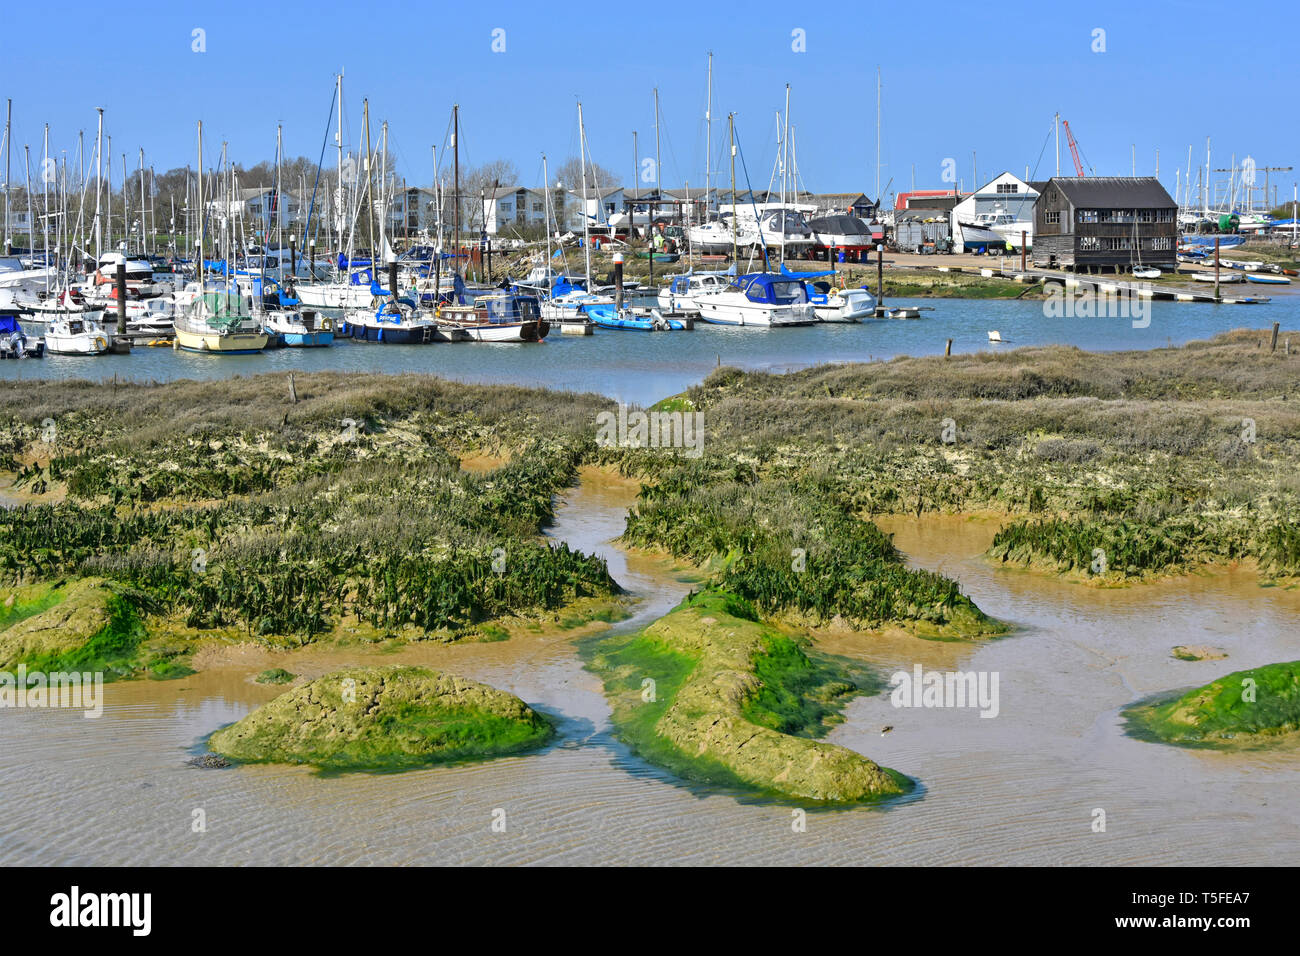 River landscape of boats & yachts in marina moorings at coastal village of Tollesbury on River Blackwater salt marshes & muddy creeks Essex England UK Stock Photo